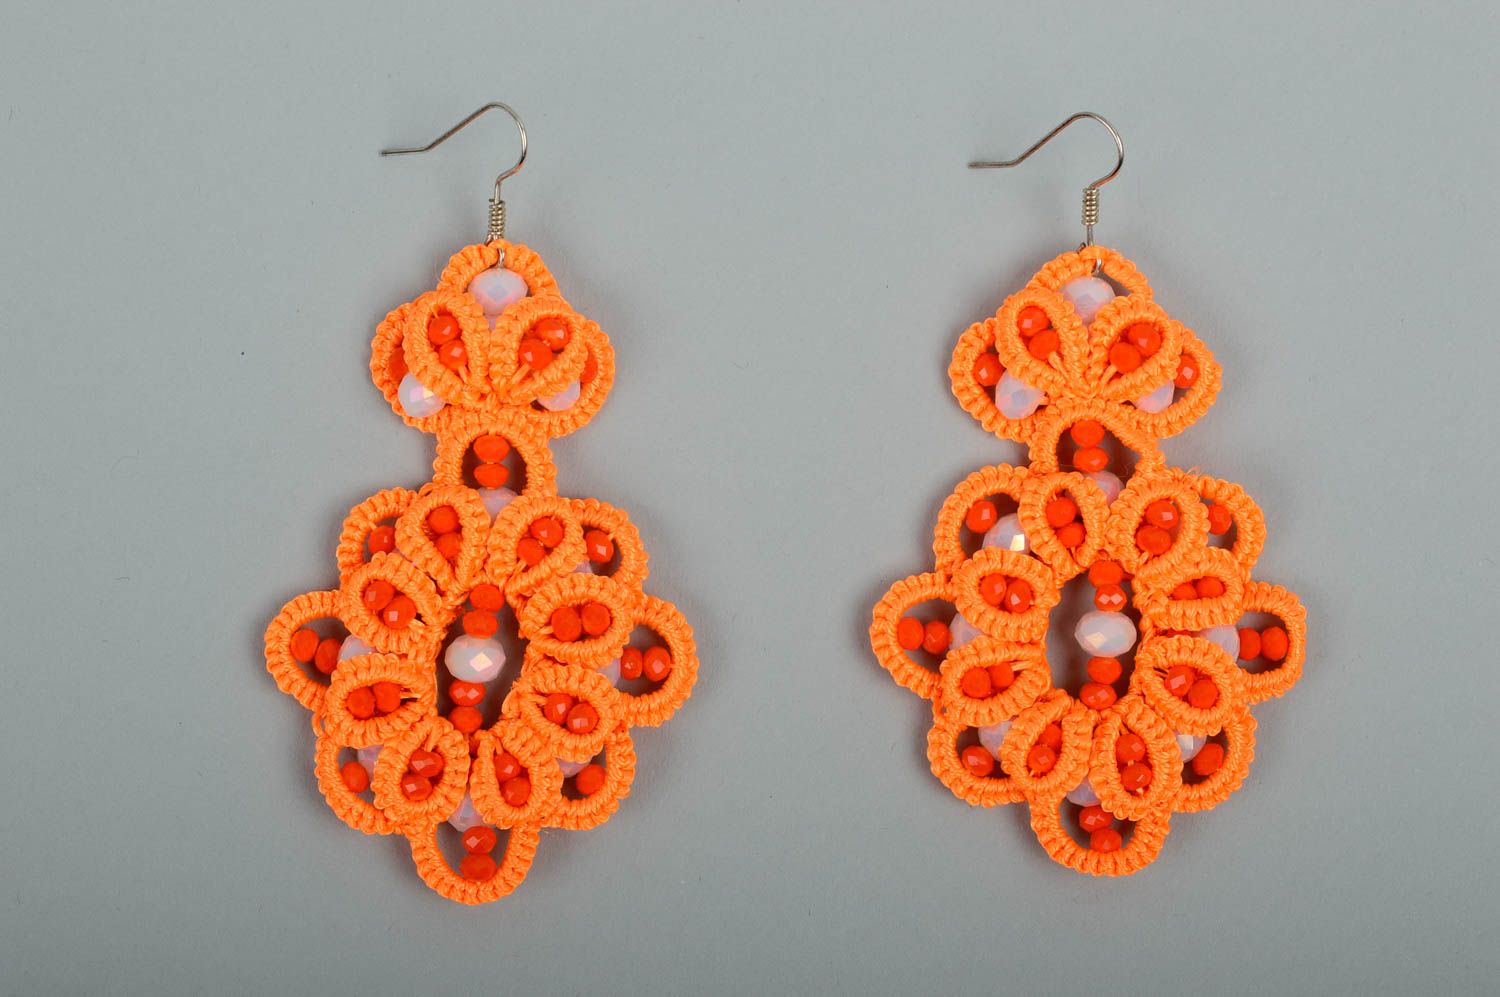 Handmade woven lace earrings textile earrings fashion accessories for girls photo 1